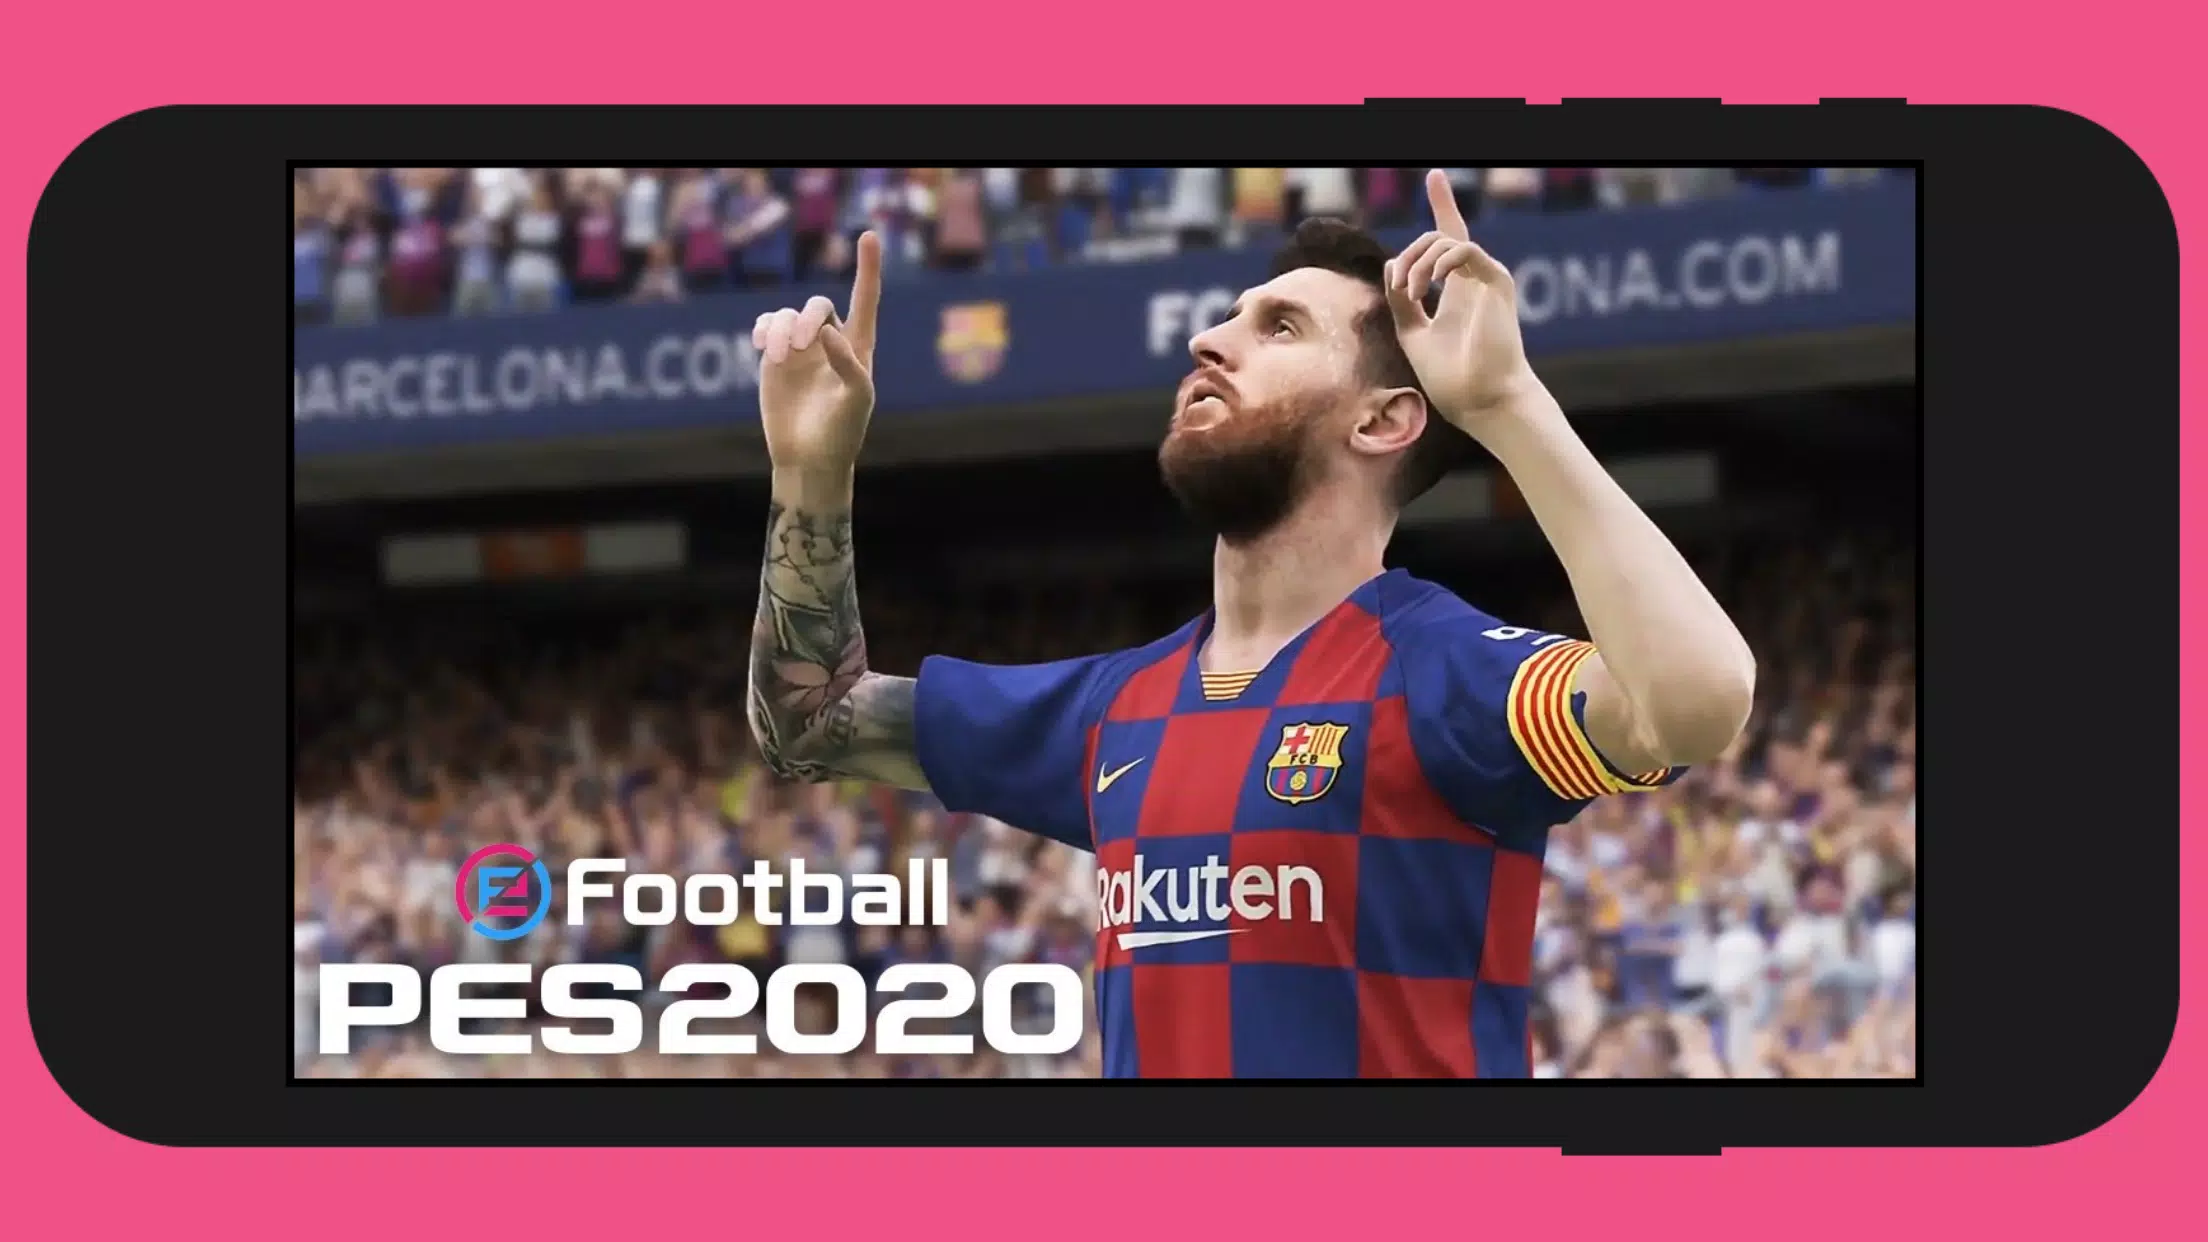 PES 2022 Game for Android - Download